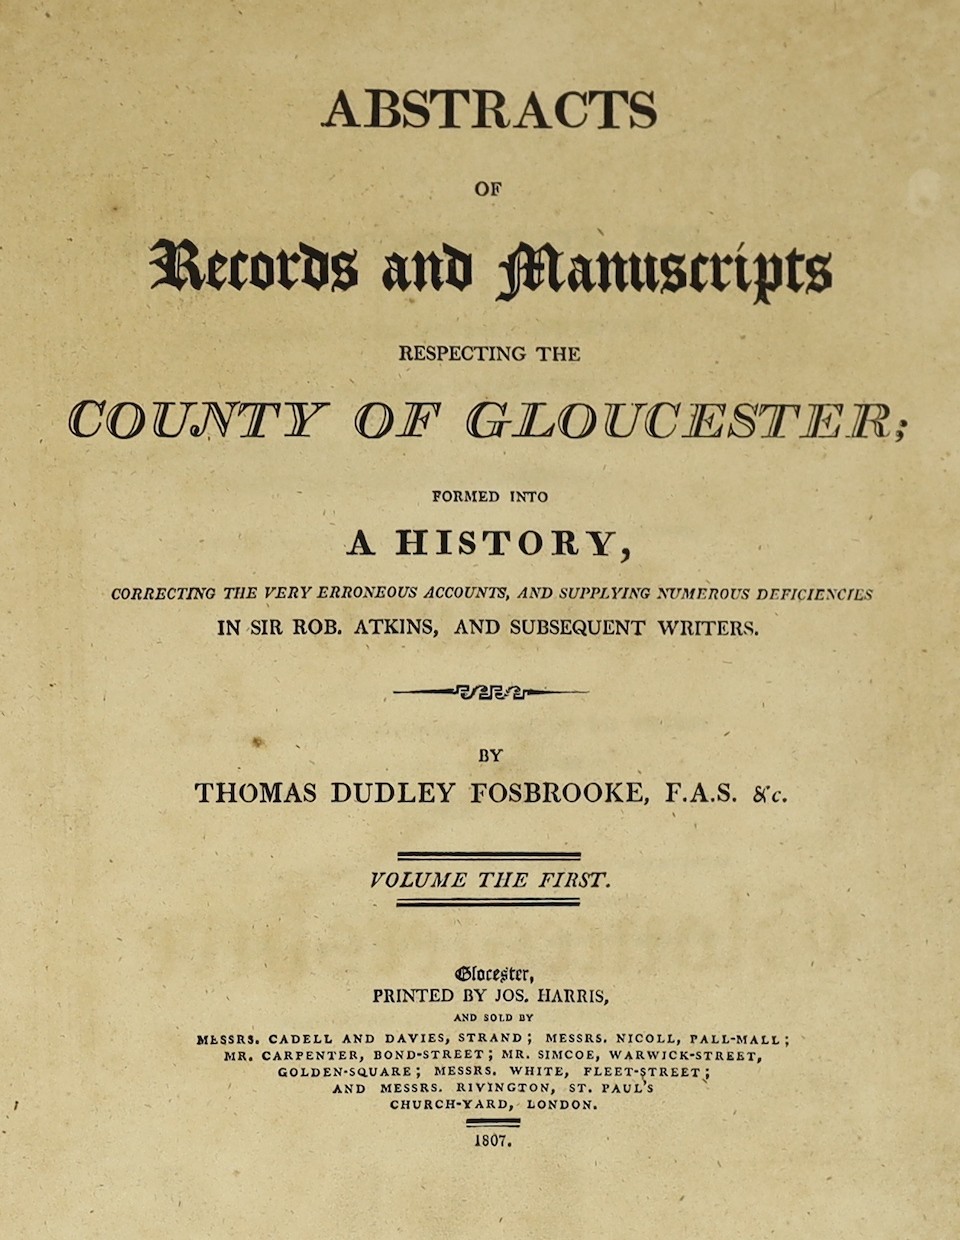 GLOUCS: Fosbroke, Thomas Dudley - Abstracts of Records and Manuscripts respecting the County of Gloucester; formed into a history ... supplying numerous deficiencies in Sir Rob. Atkins ... vol.1 (only, of 2). pictorial e